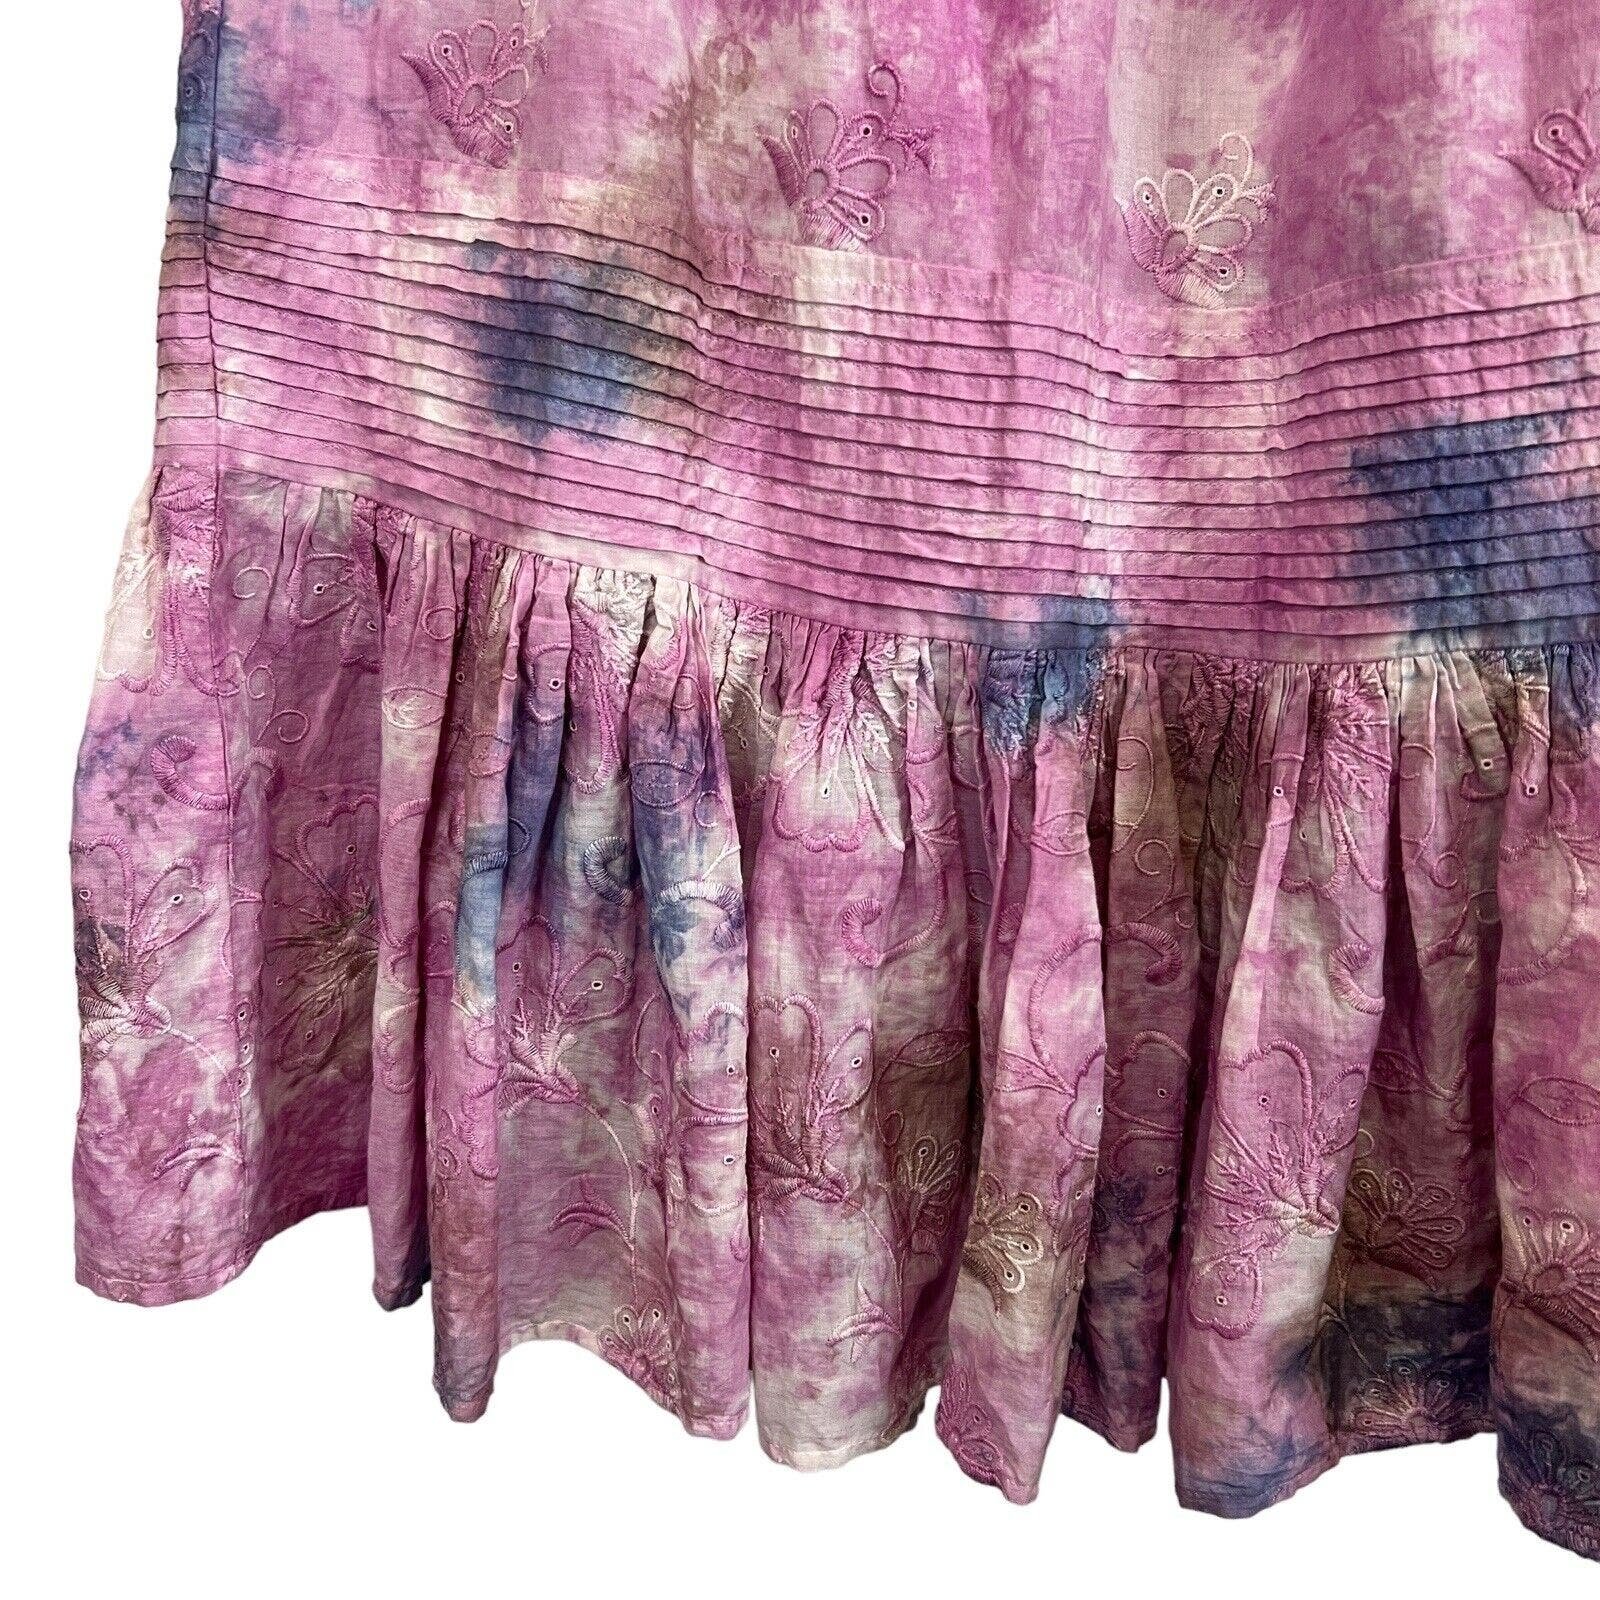 good price by Anthropologie Odessa Tie-Dye Maxi Skirt Size XS ovfp5mYE3 Outlet Store